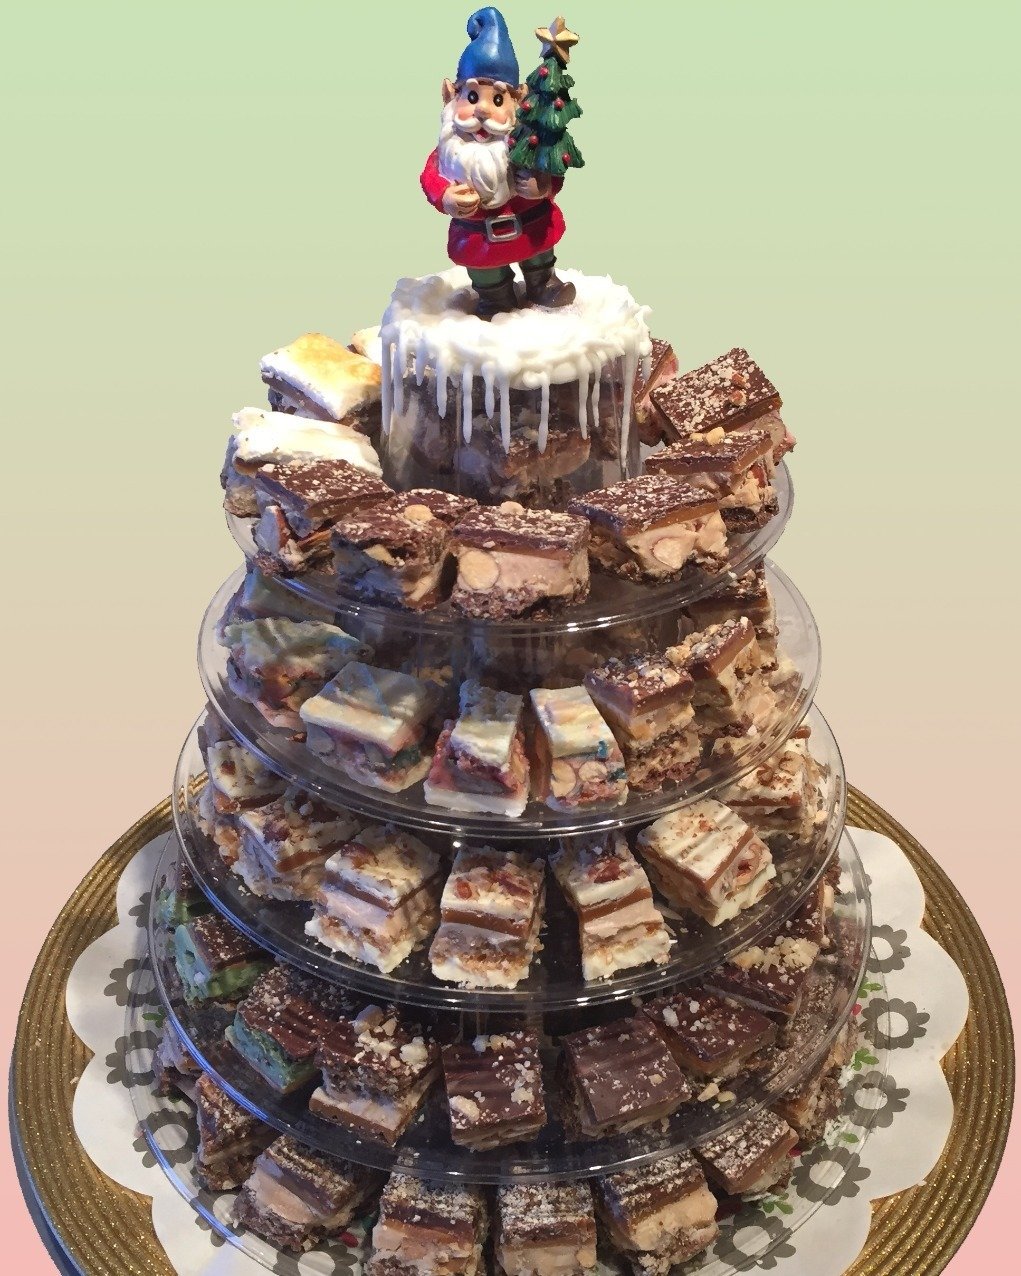 Toffee Tower
(choice of 5 flavors)